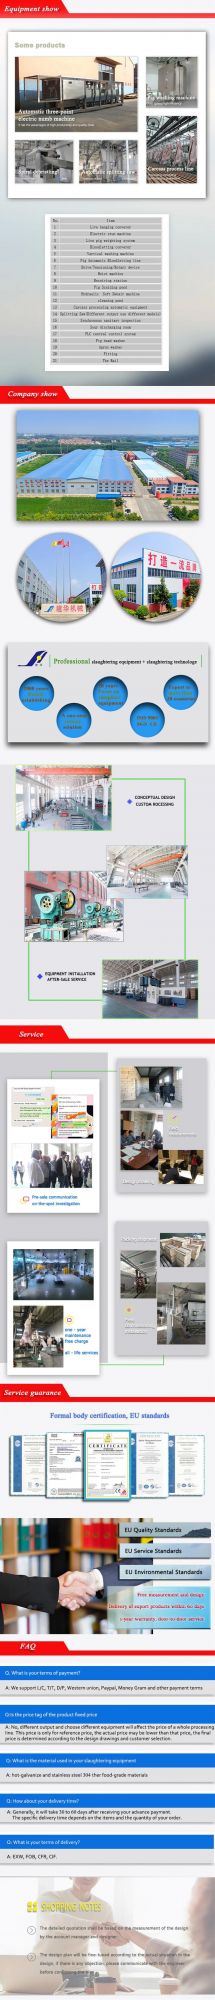 Efficiency Steam Type Pig Carcass Scalding Tunnel Meat Processing Machine